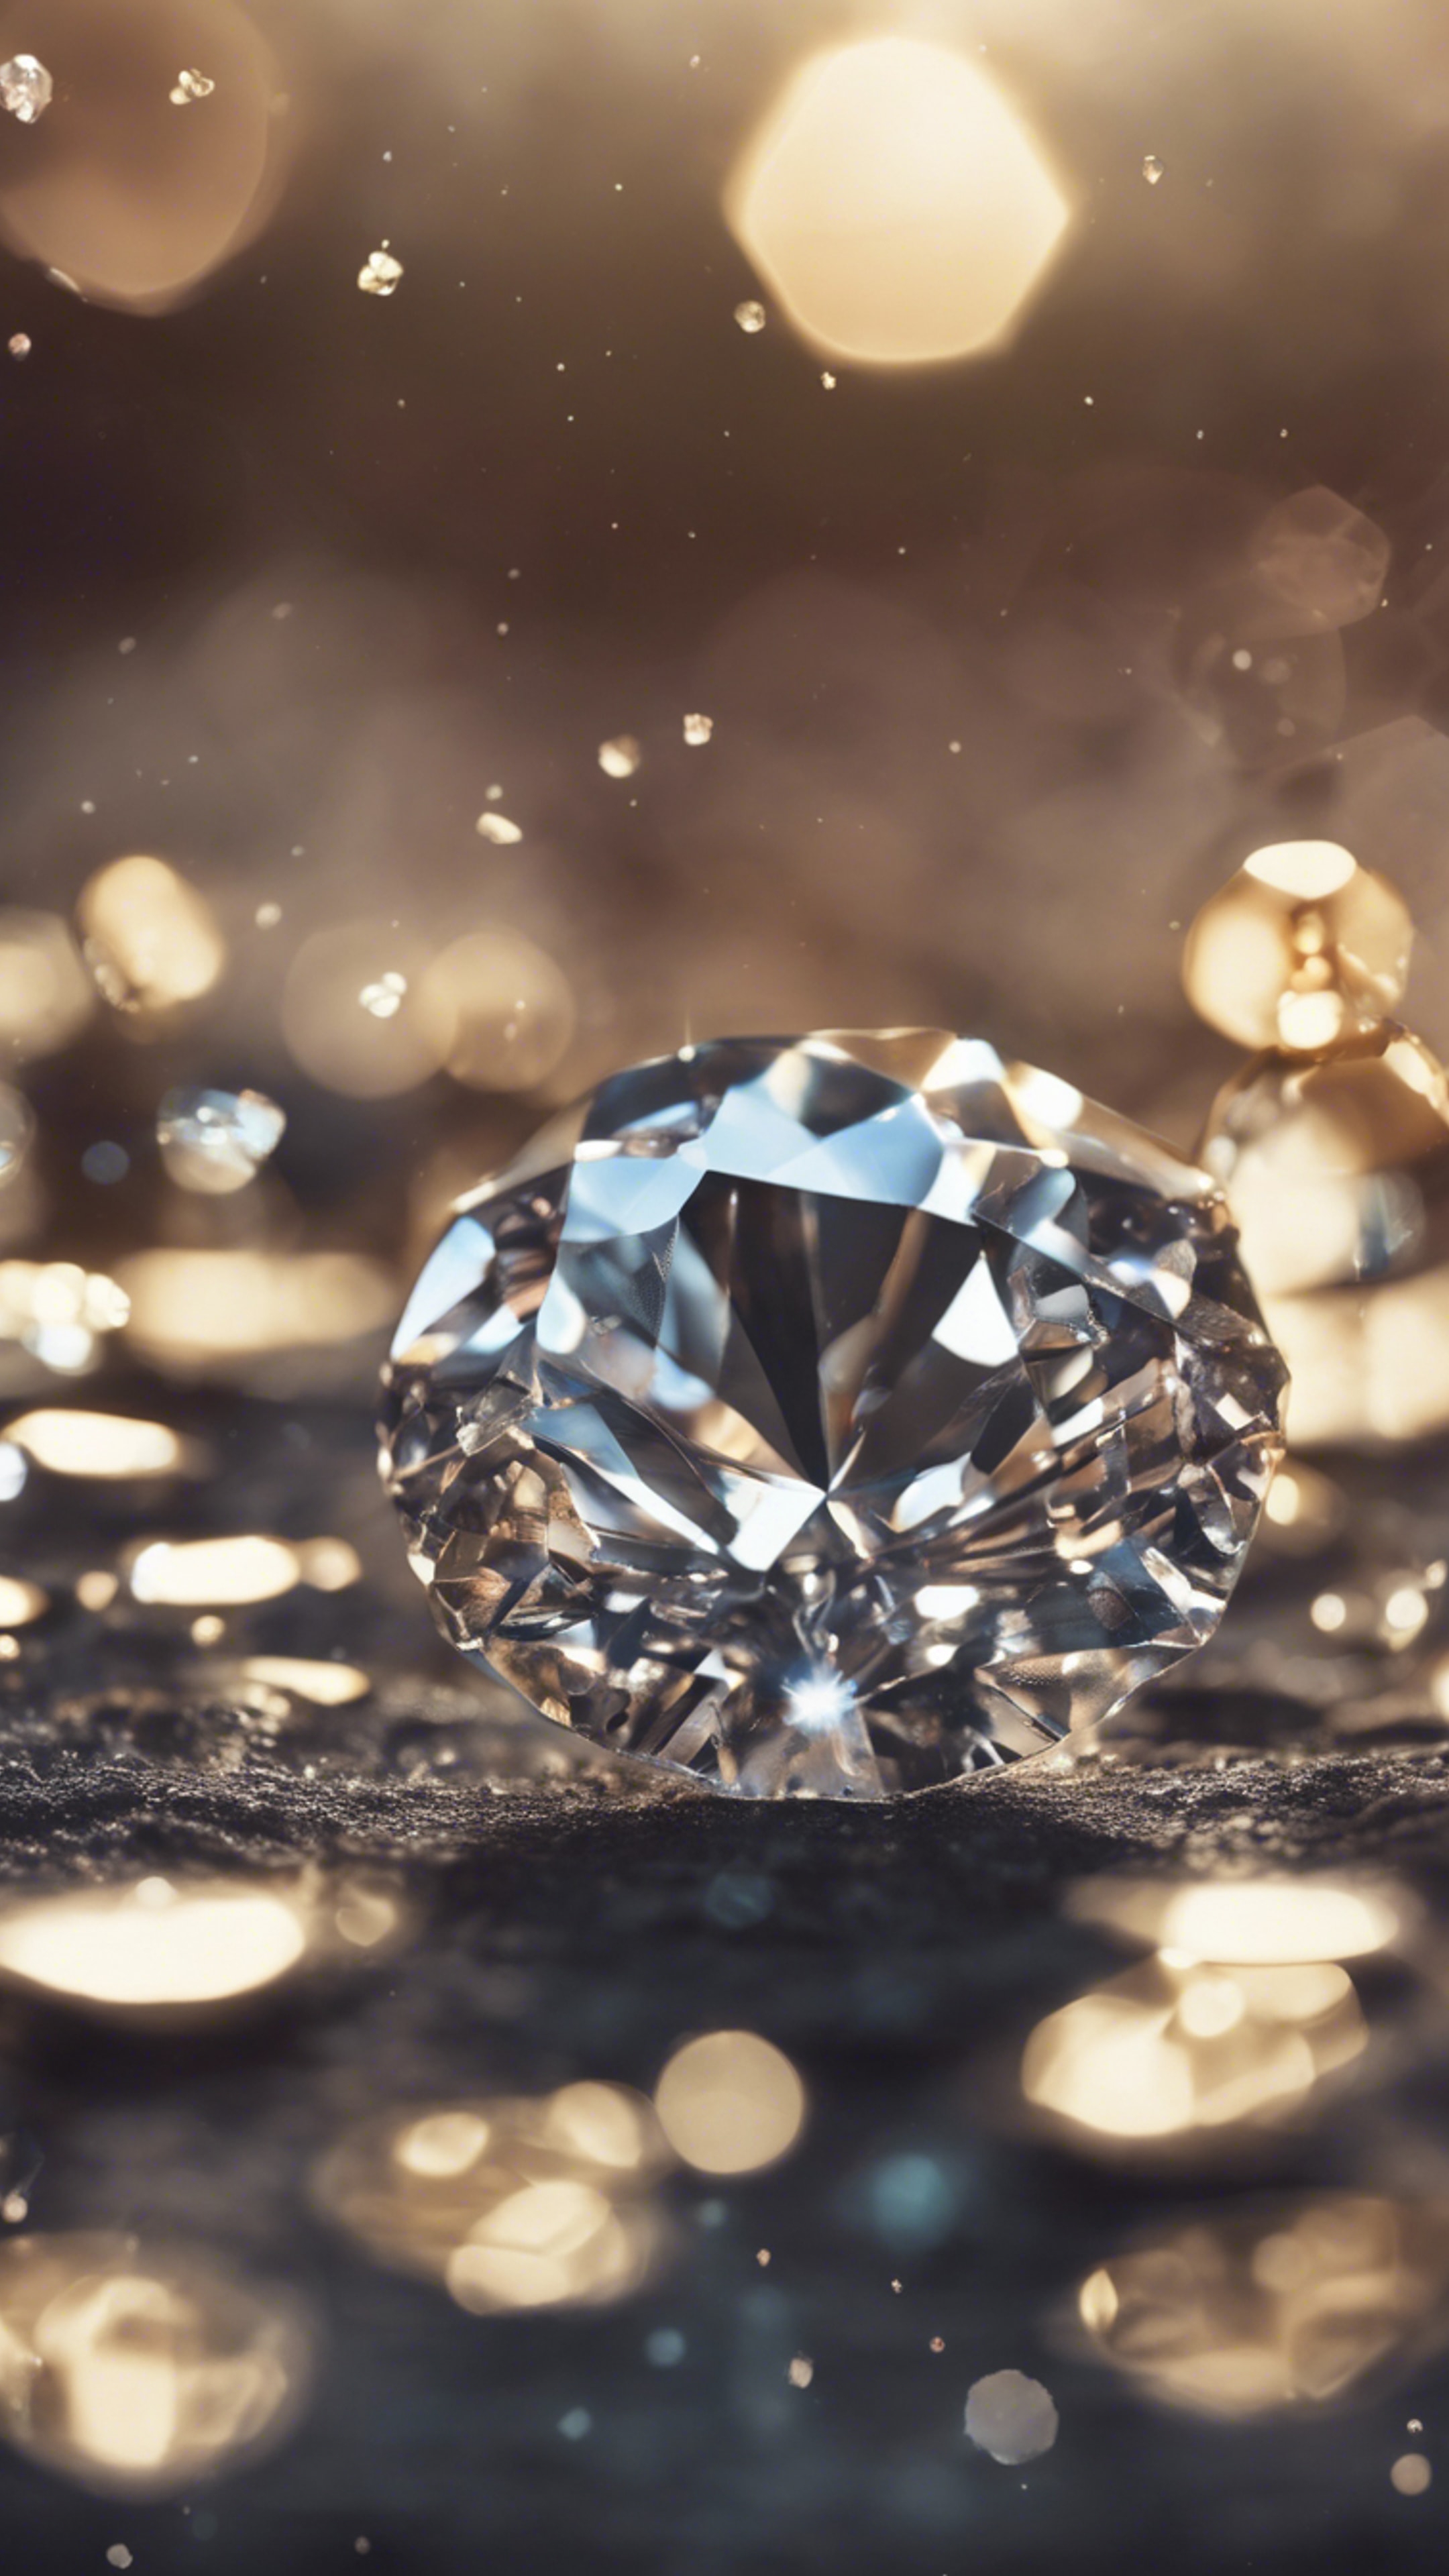 In the face of adversity, remember that diamonds are made under pressure and so are you. Behang[2323702b52984c91b15b]